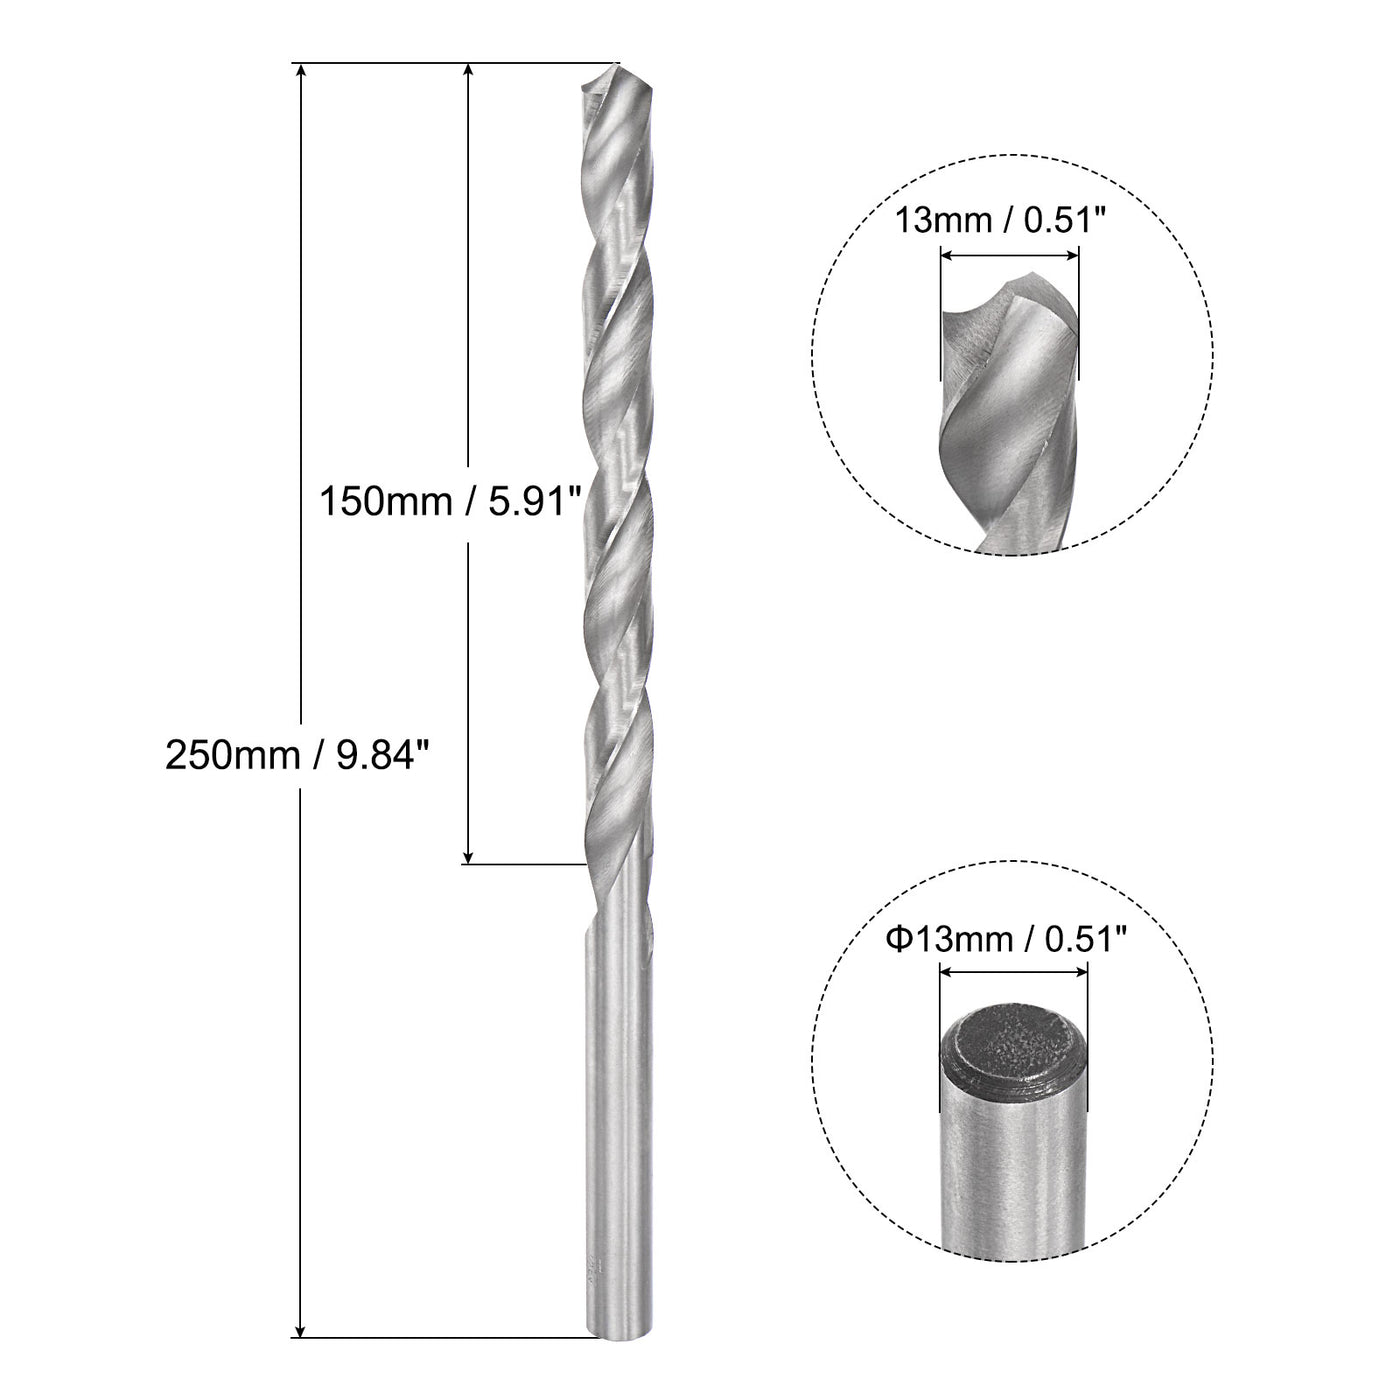 uxcell Uxcell 13mm Twist Drill Bits, High-Speed Steel Extra Long Drill Bit 250mm Length